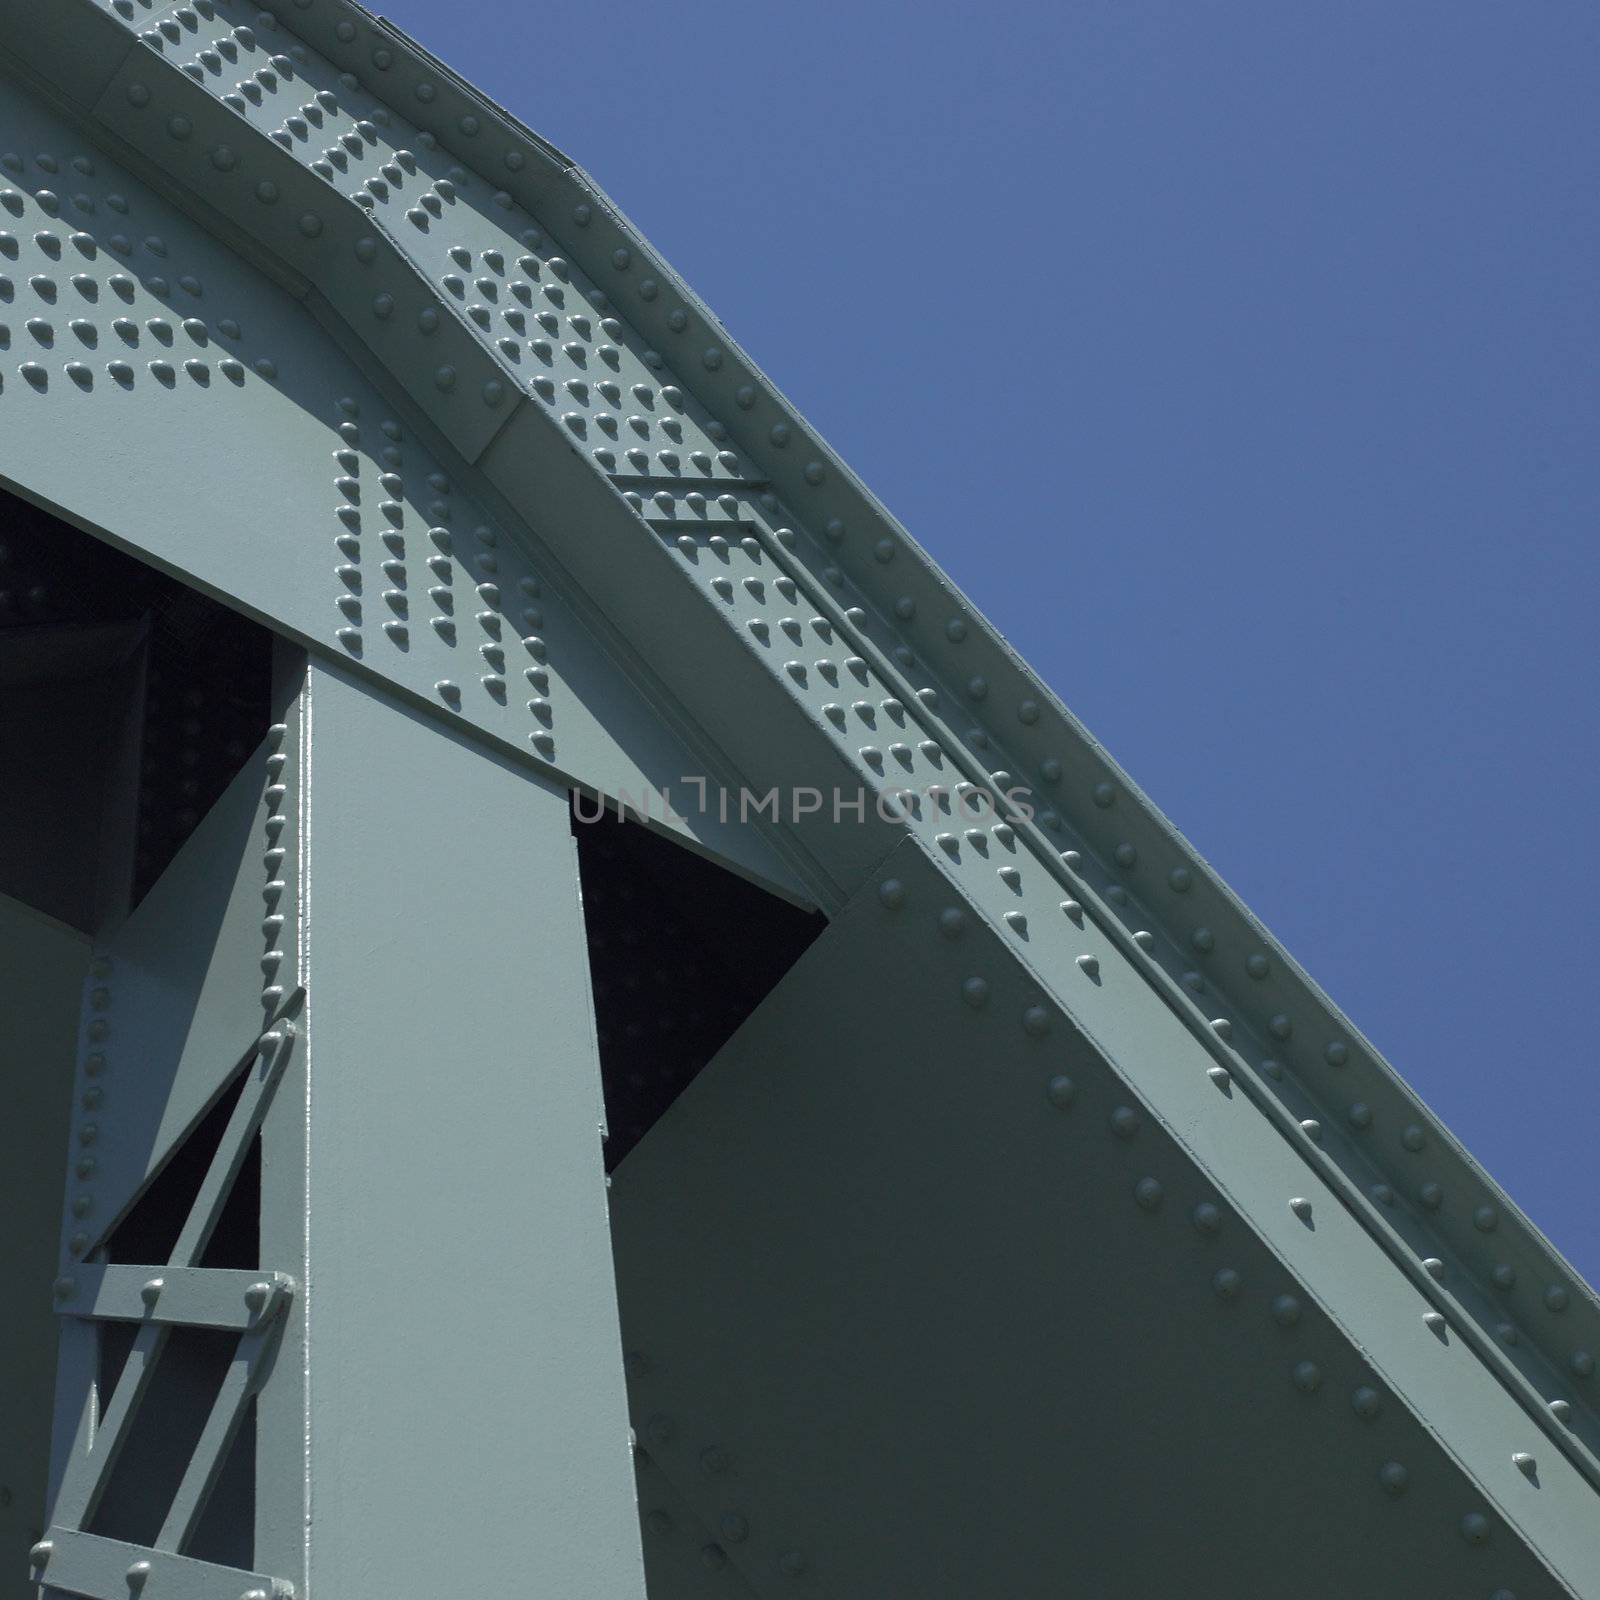 Structure of a bridge by mmm